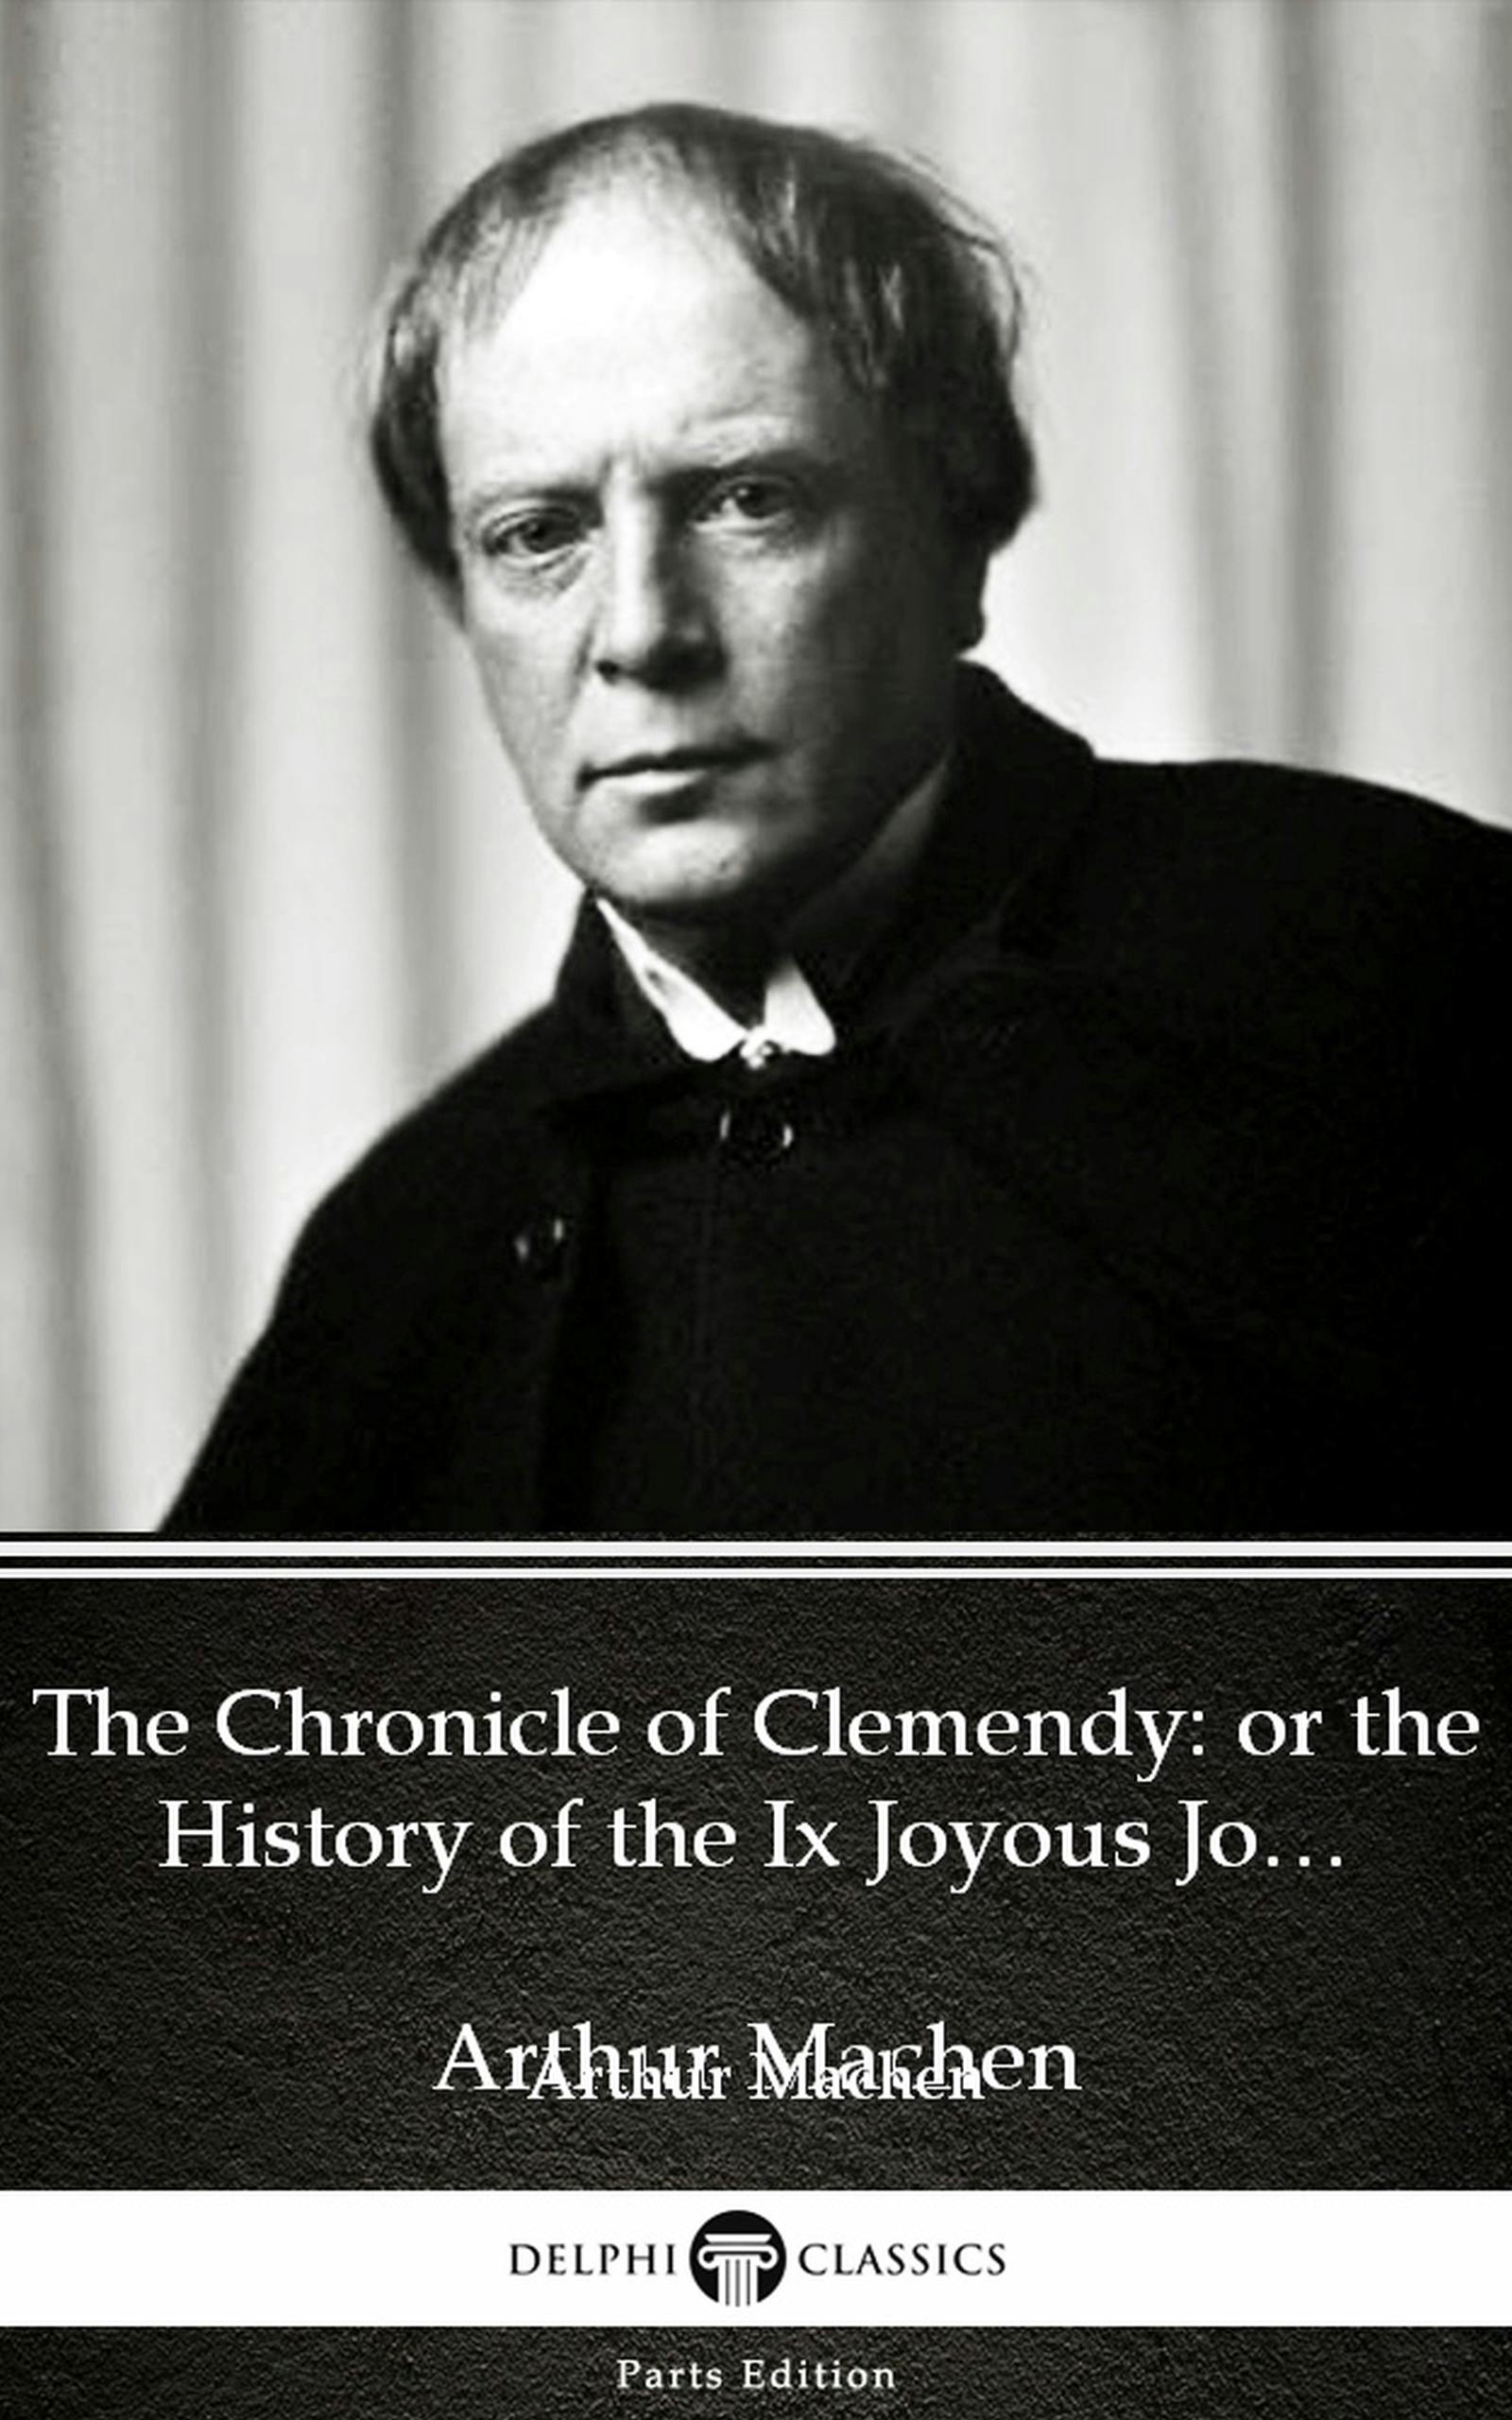 The Chronicle of Clemendy or the History of the Ix Joyous Journeys. Carbonnek by Arthur Machen - Delphi Classics (Illustrated) - undefined